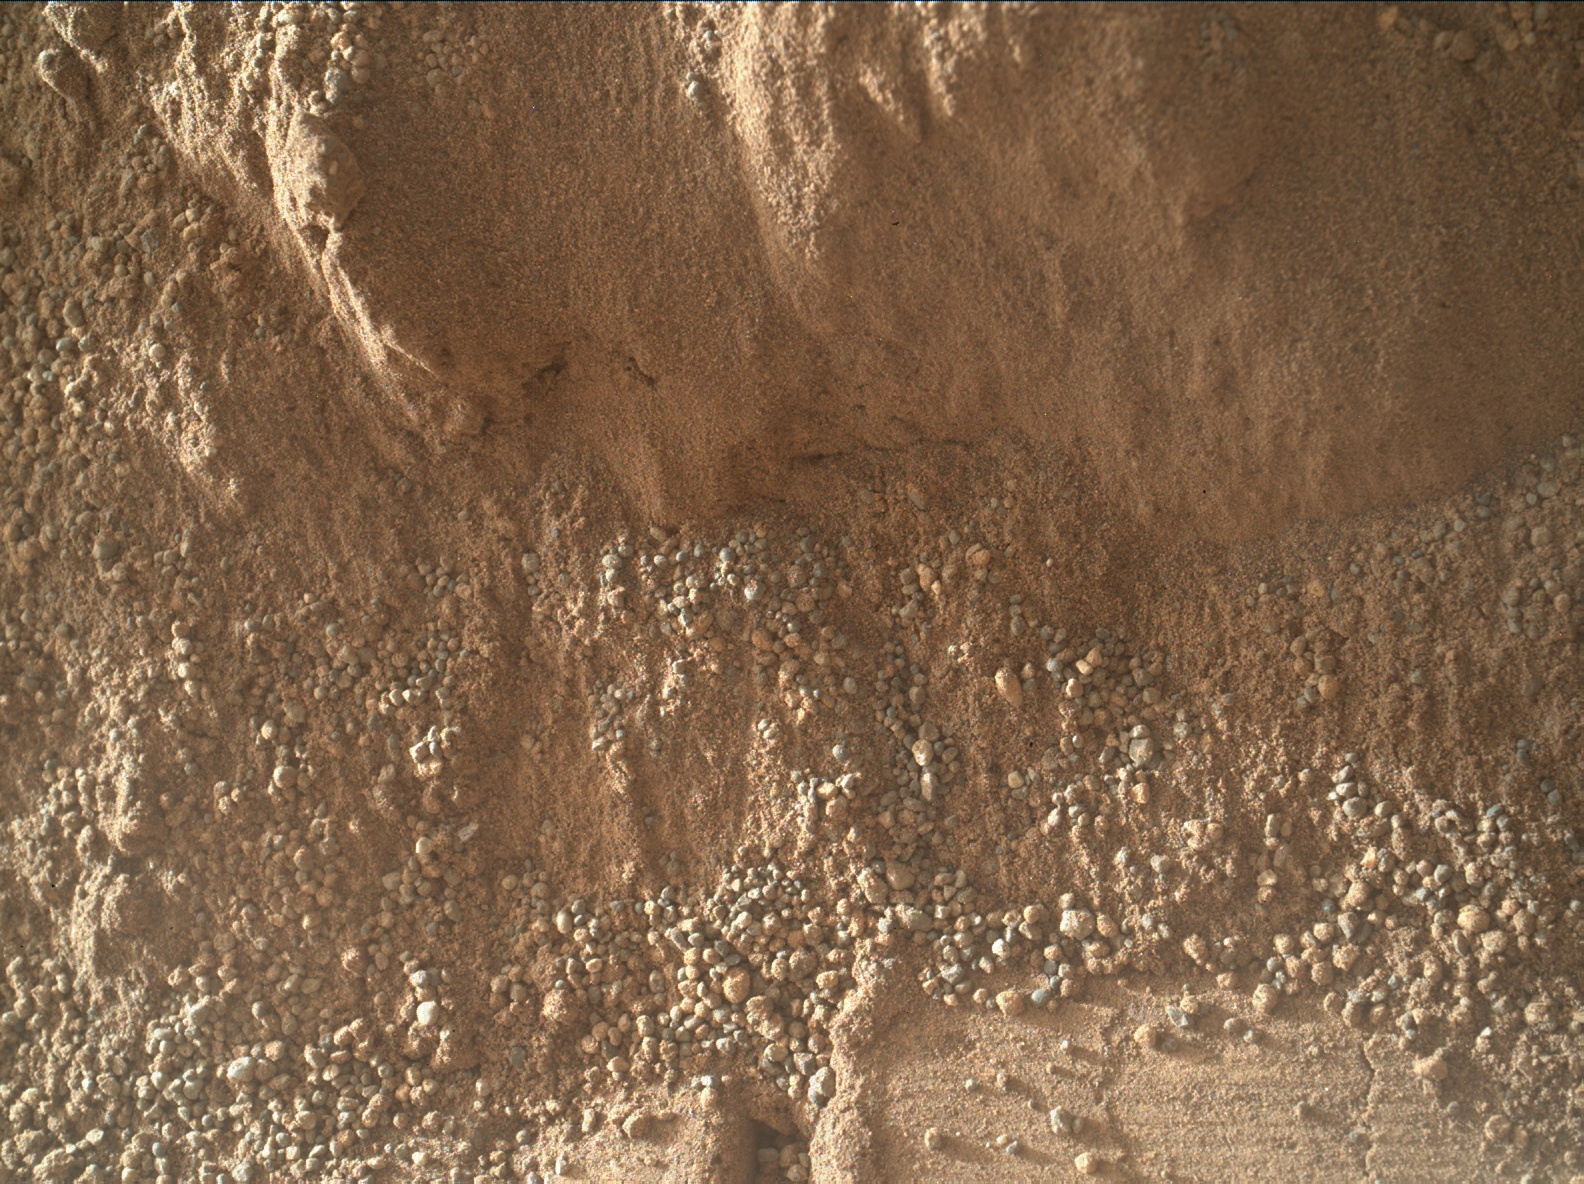 Nasa's Mars rover Curiosity acquired this image using its Mars Hand Lens Imager (MAHLI) on Sol 58